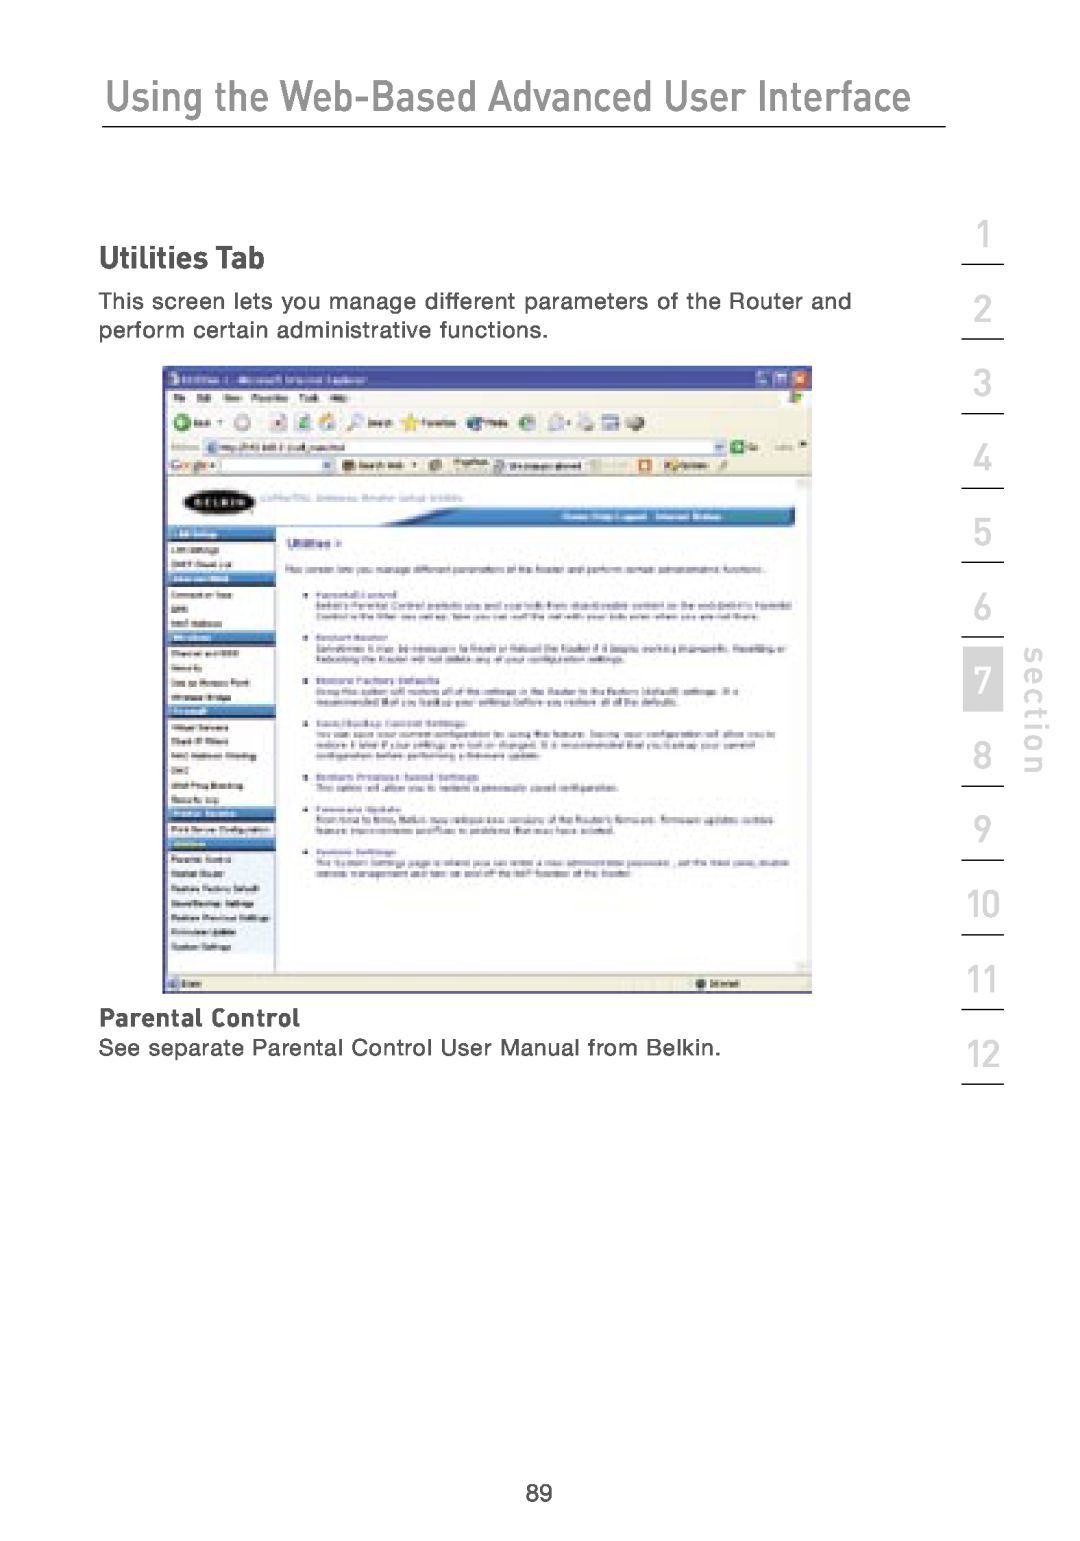 Belkin F5D7230AU4P user manual Utilities Tab, Parental Control, Using the Web-Based Advanced User Interface, section 